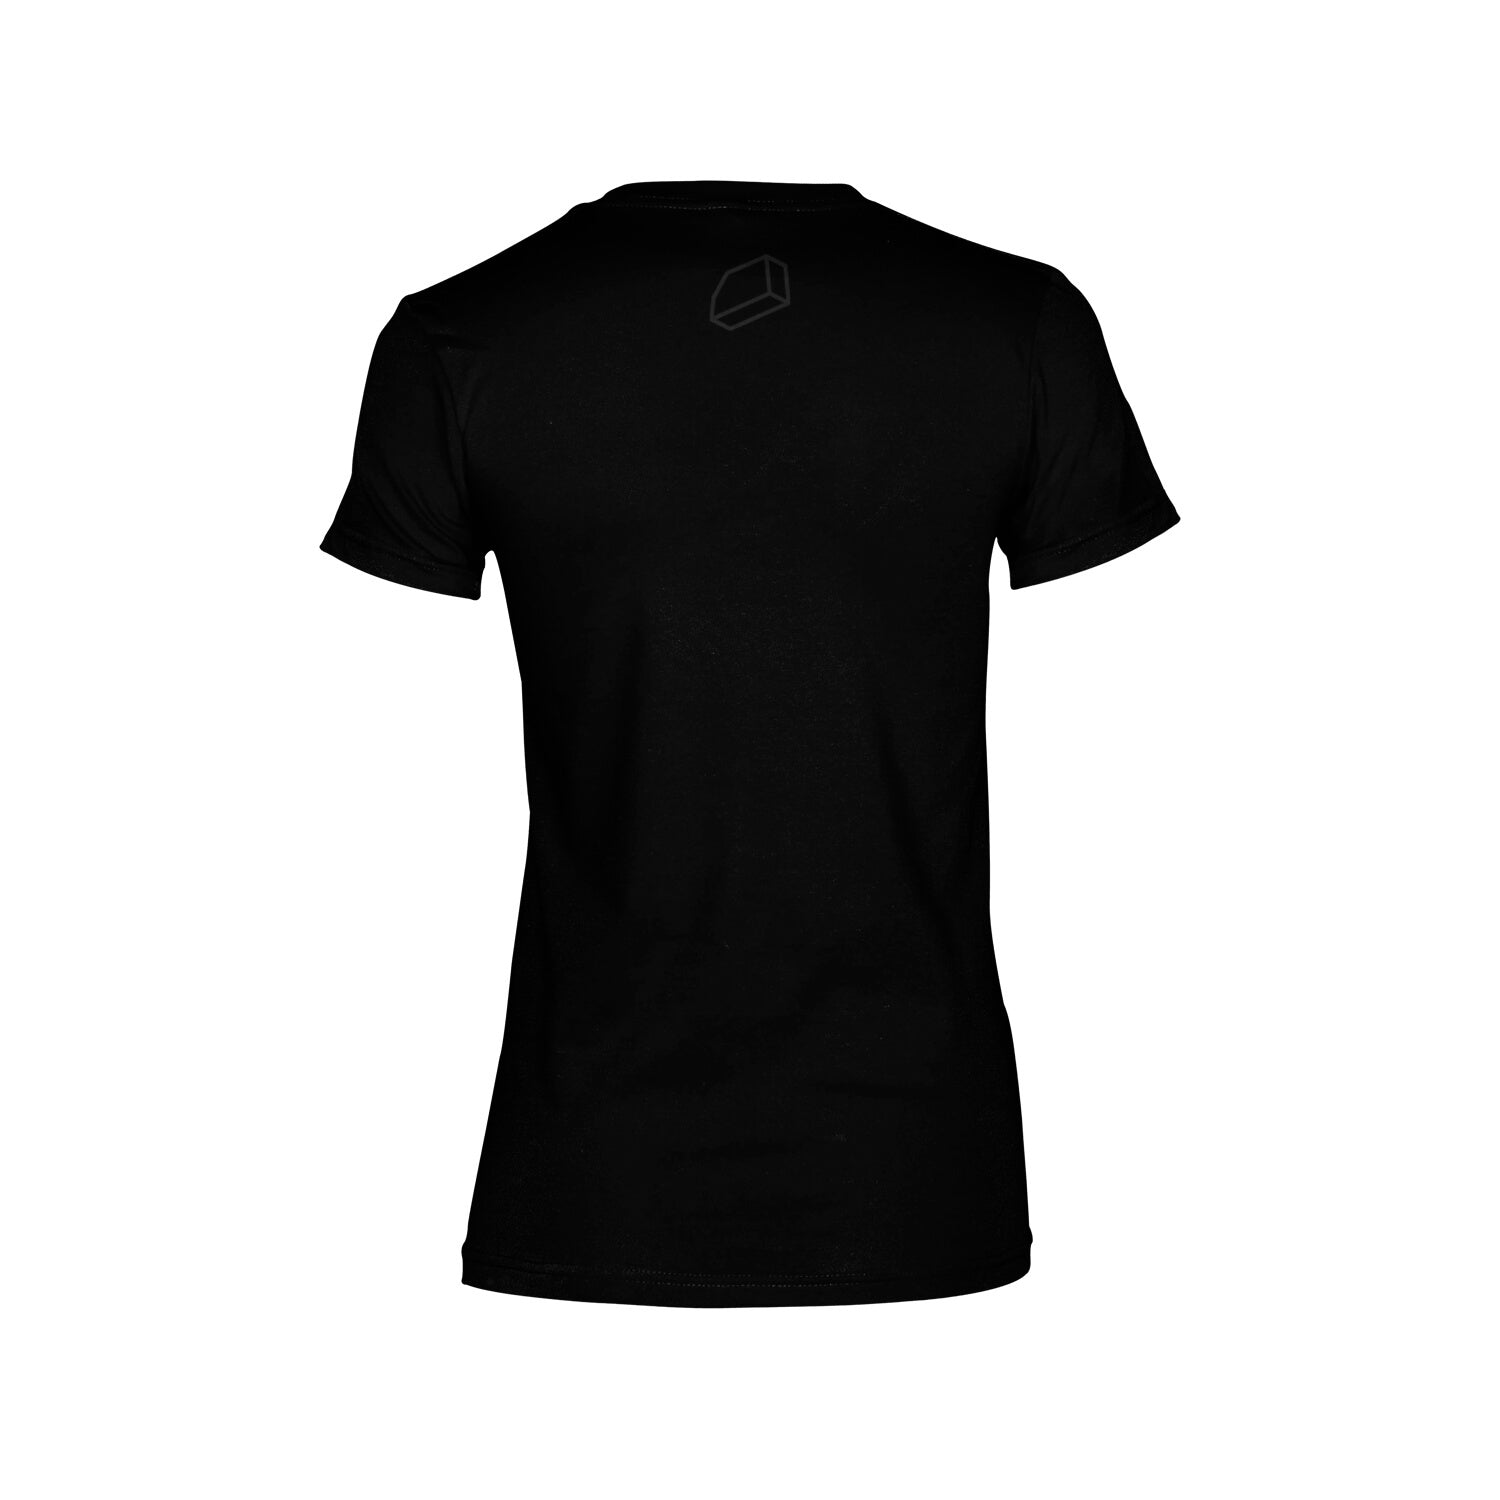 Edition limitée 25 Years Stealth T-shirt (Femmes)